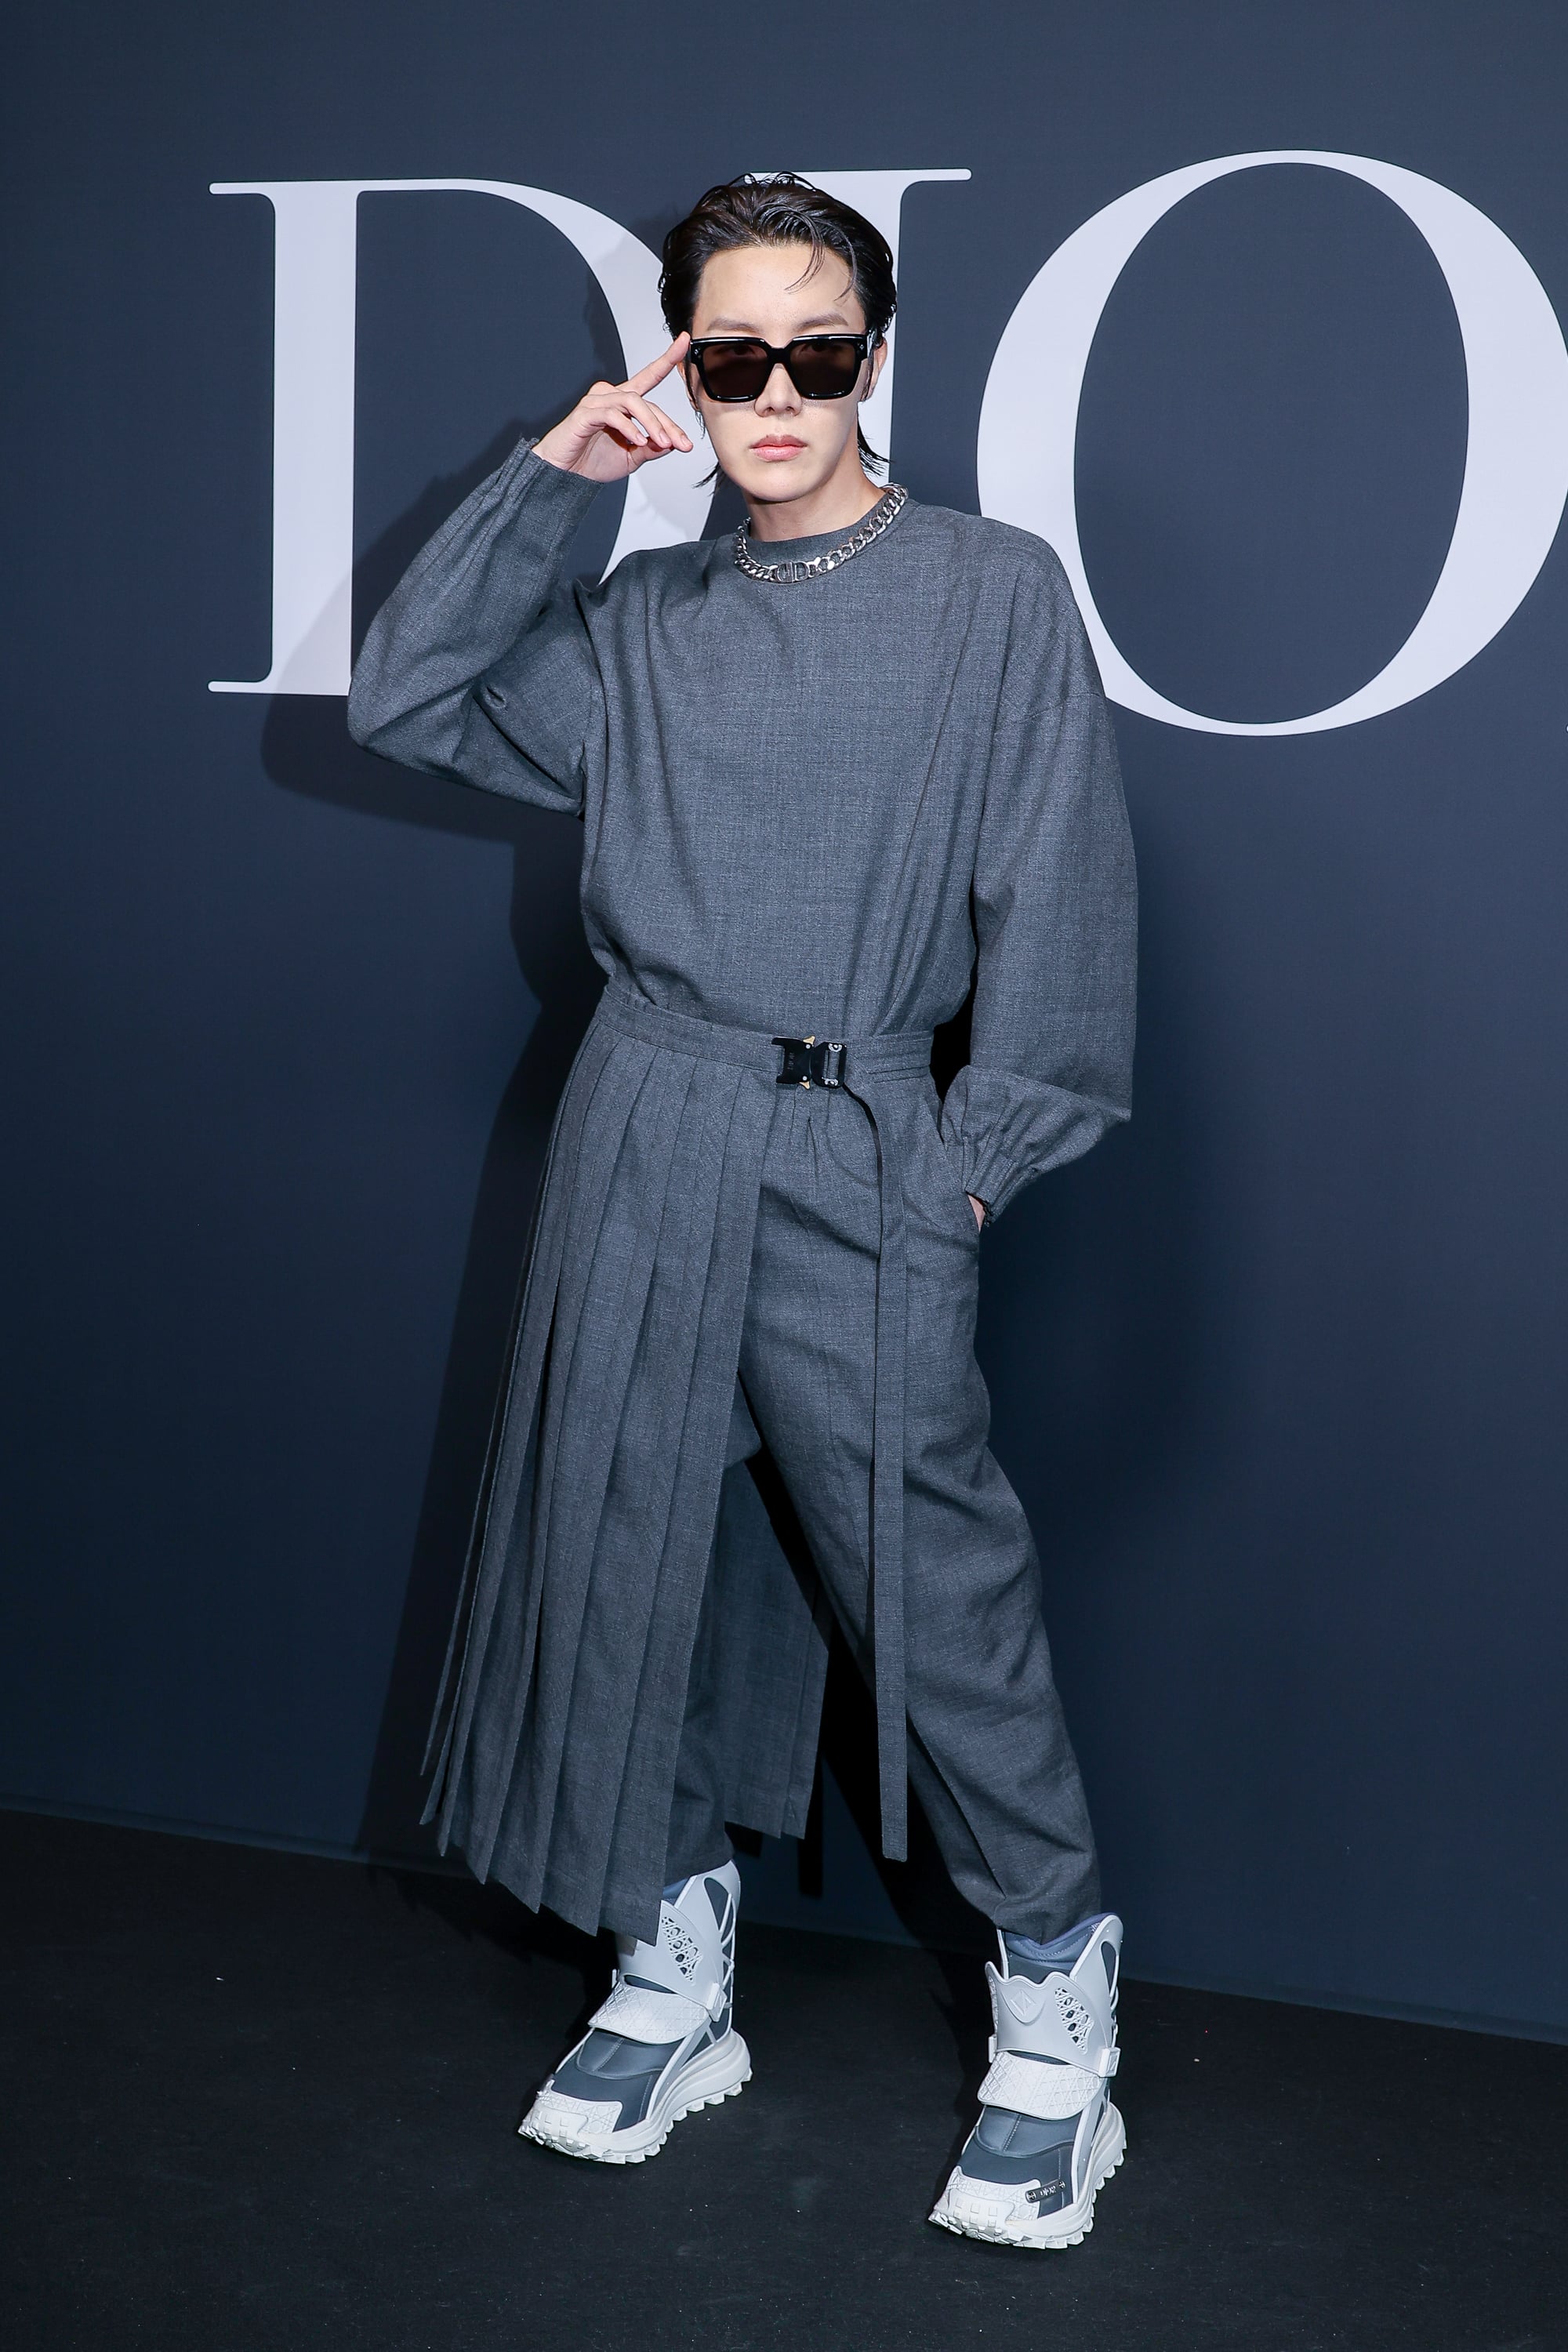 J-Hope at the Dior Homme Menswear Fall 2023 Show, Heartstopper's Kit  Connor Cements his Fashion Status at the Loewe Show in Leather Joggers